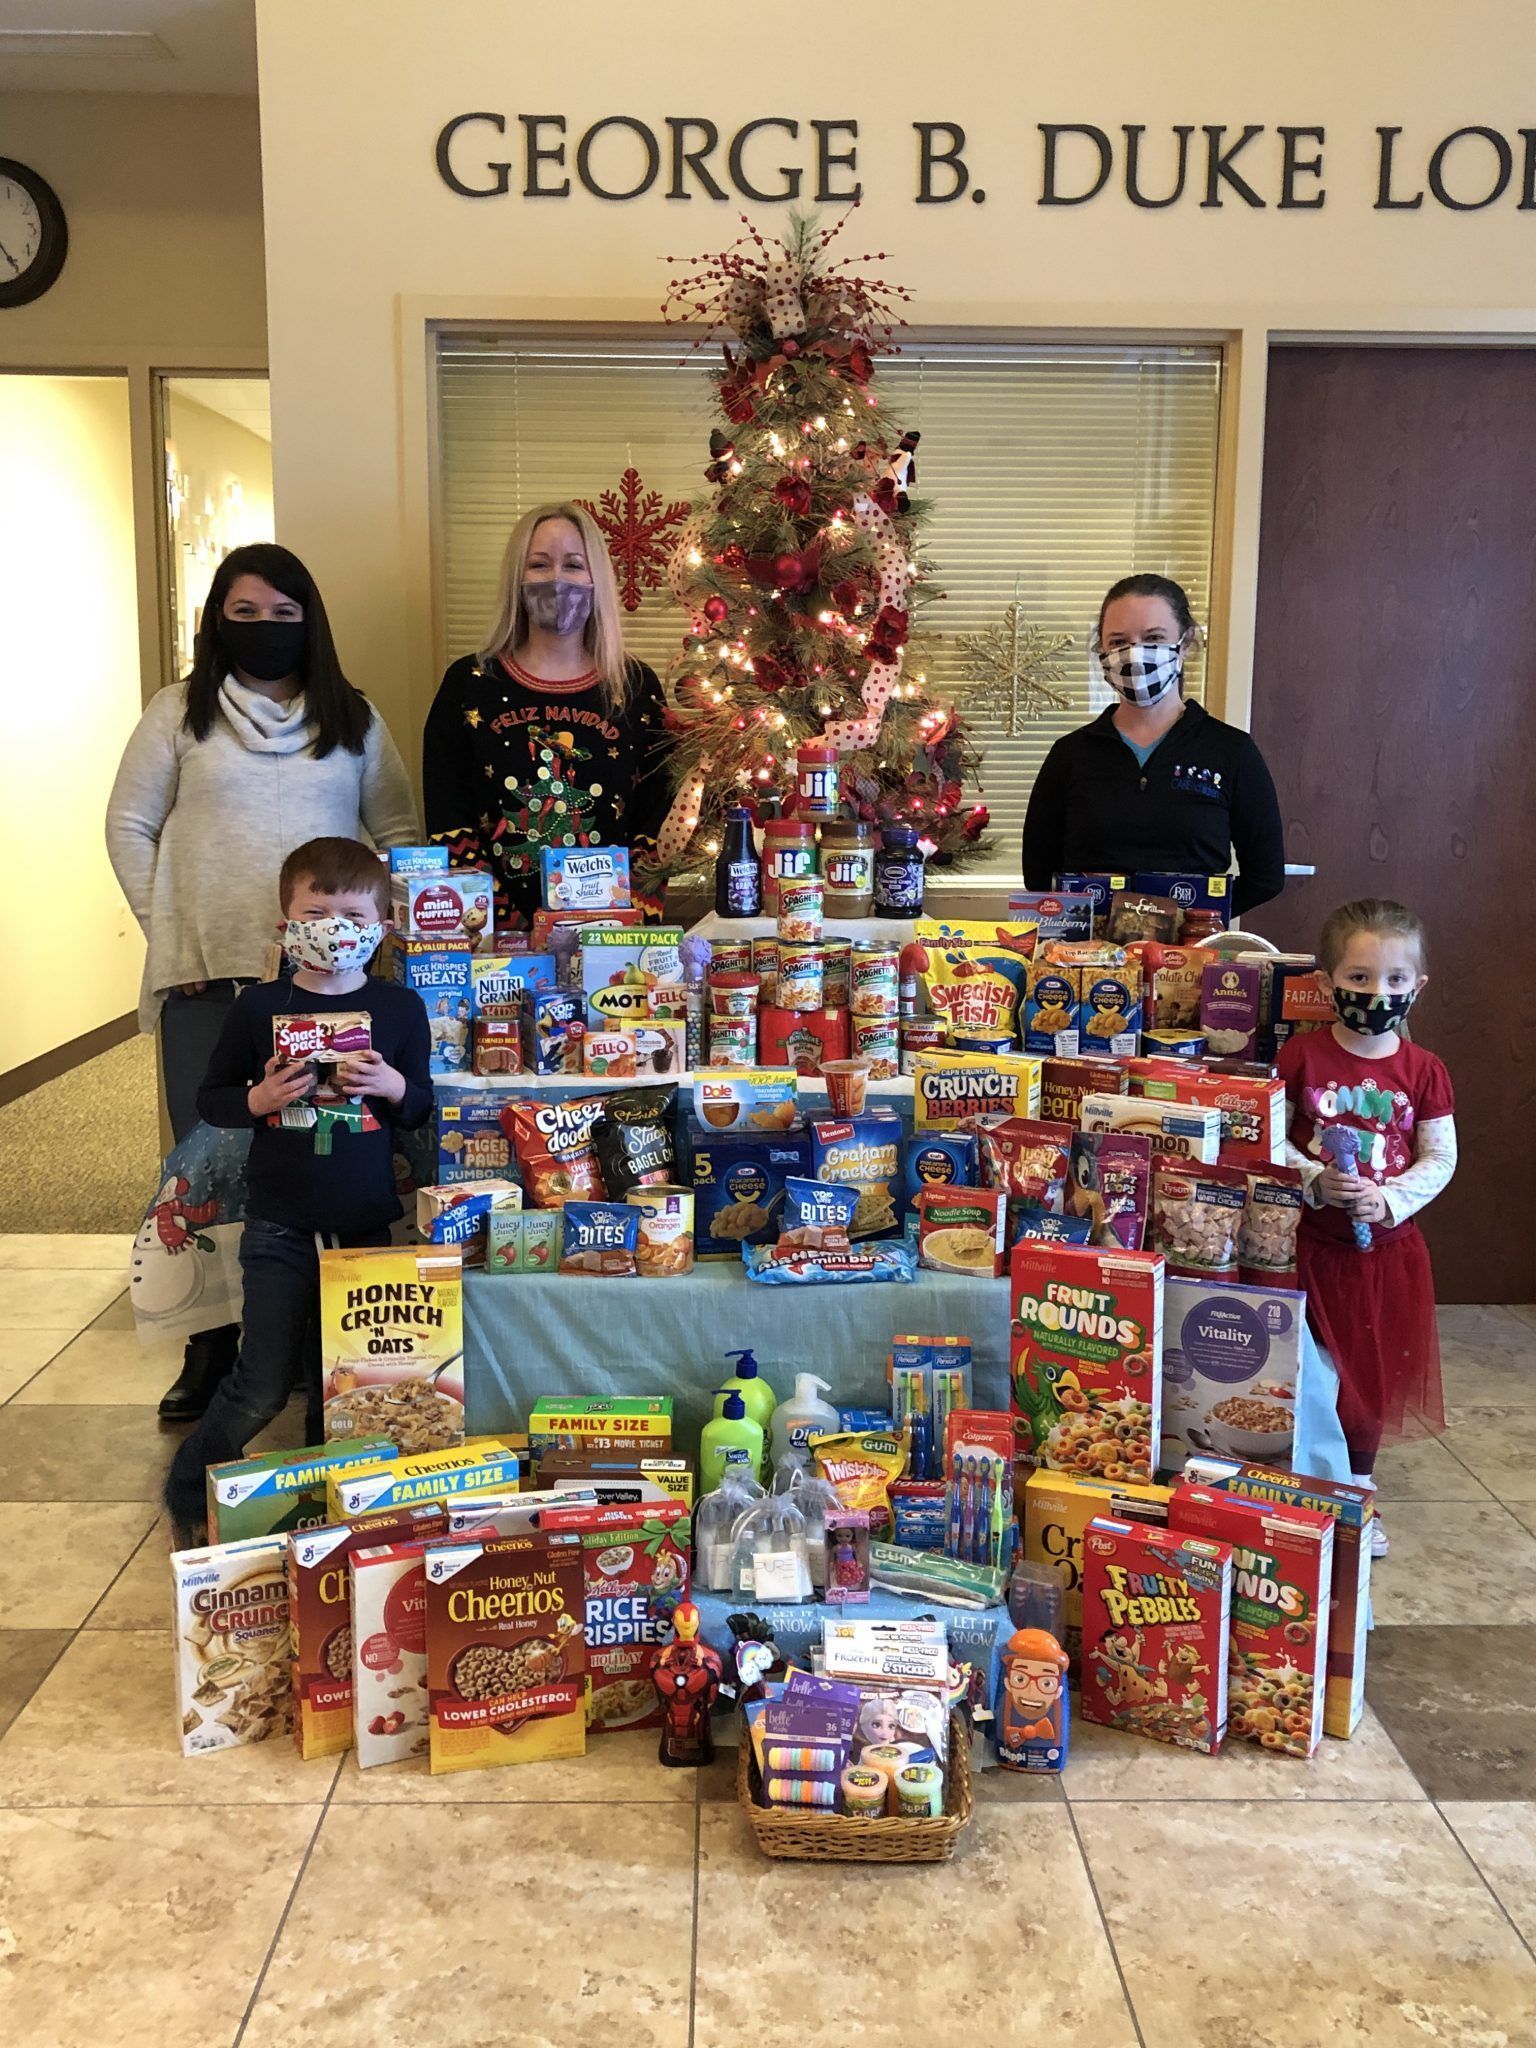 From left, preschool students Lucas Ball and Julianna Carlson stand next to the many donations. Pictured with the students are (back from left) Jolene Longley, Angela Erway, and Kimberly Engstrom.